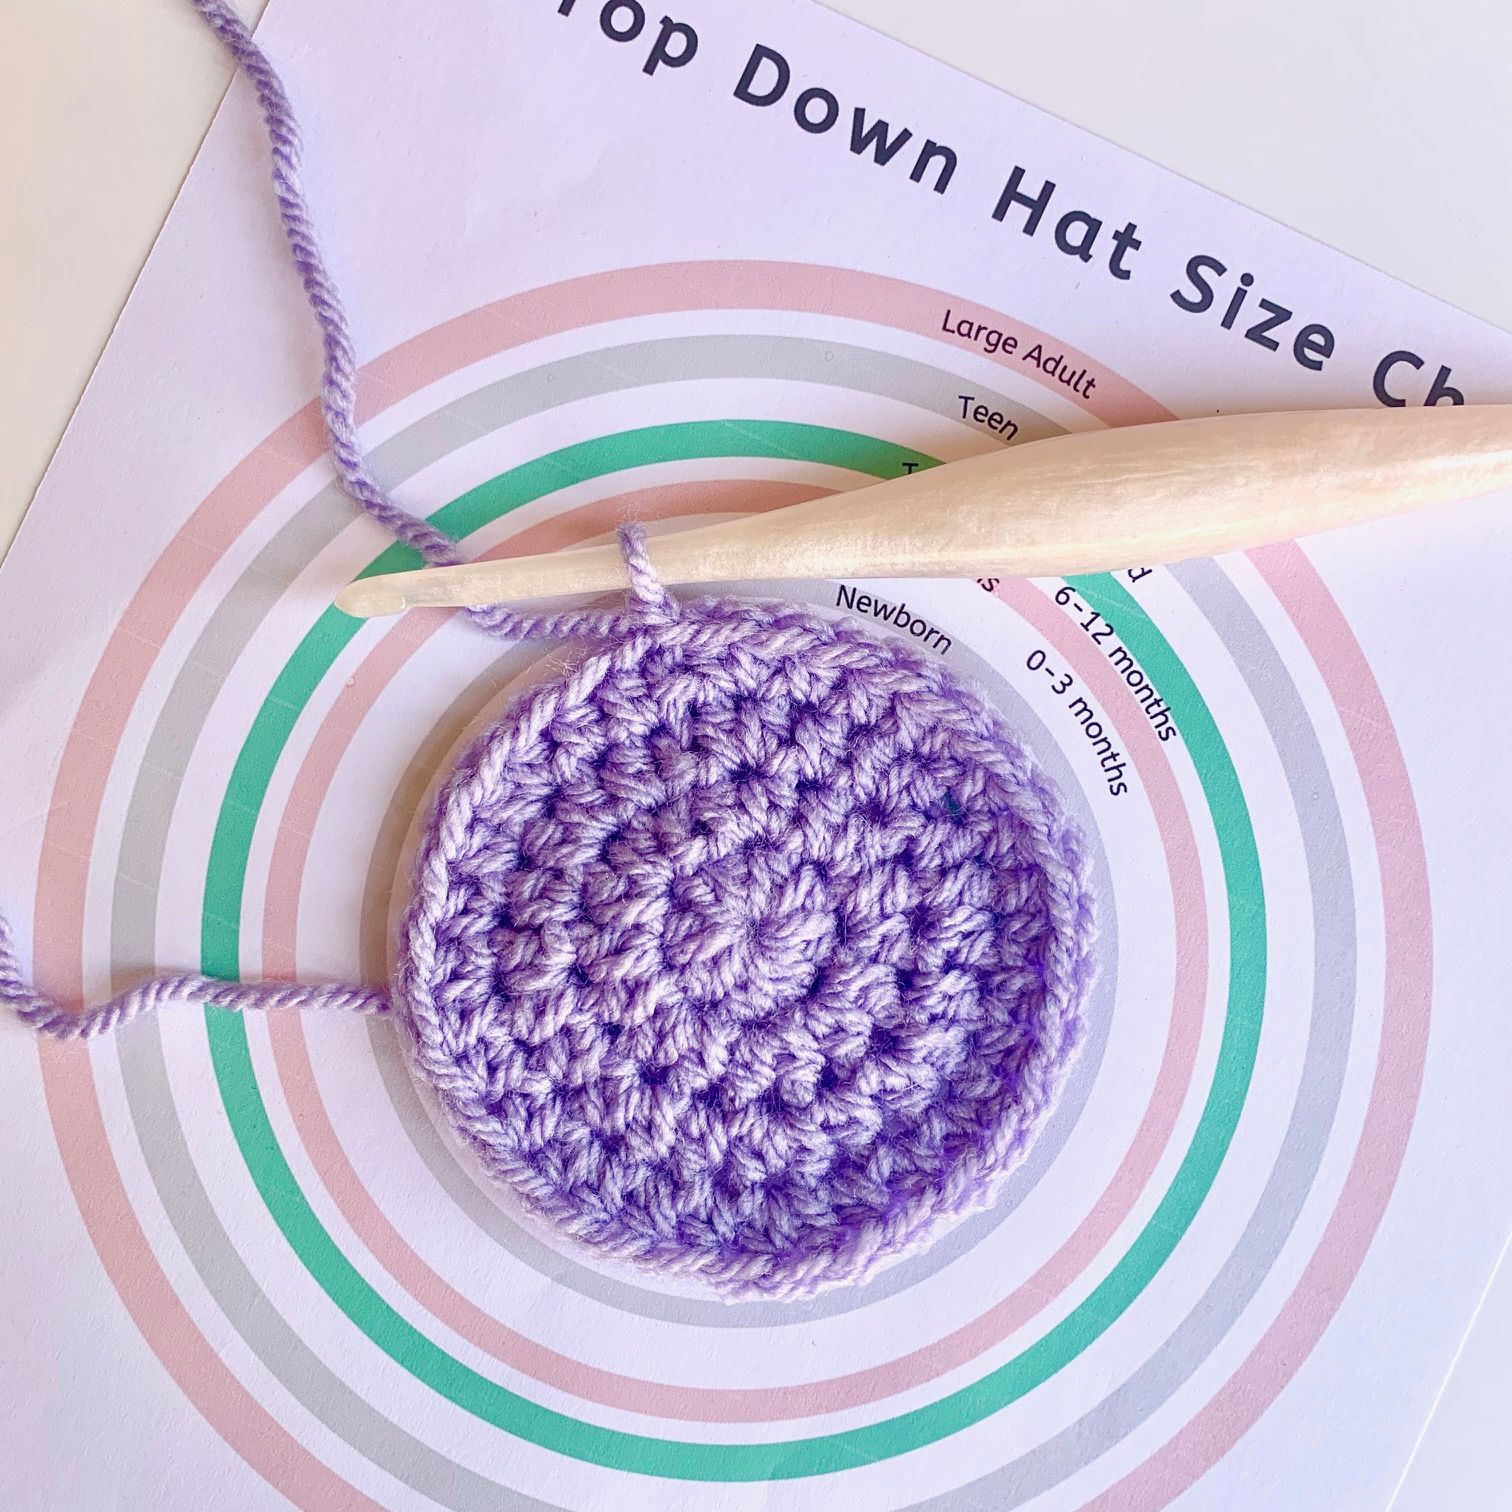 How to Crochet Hat Sizes in 3 Easy Steps + Hat Sizing Freebie